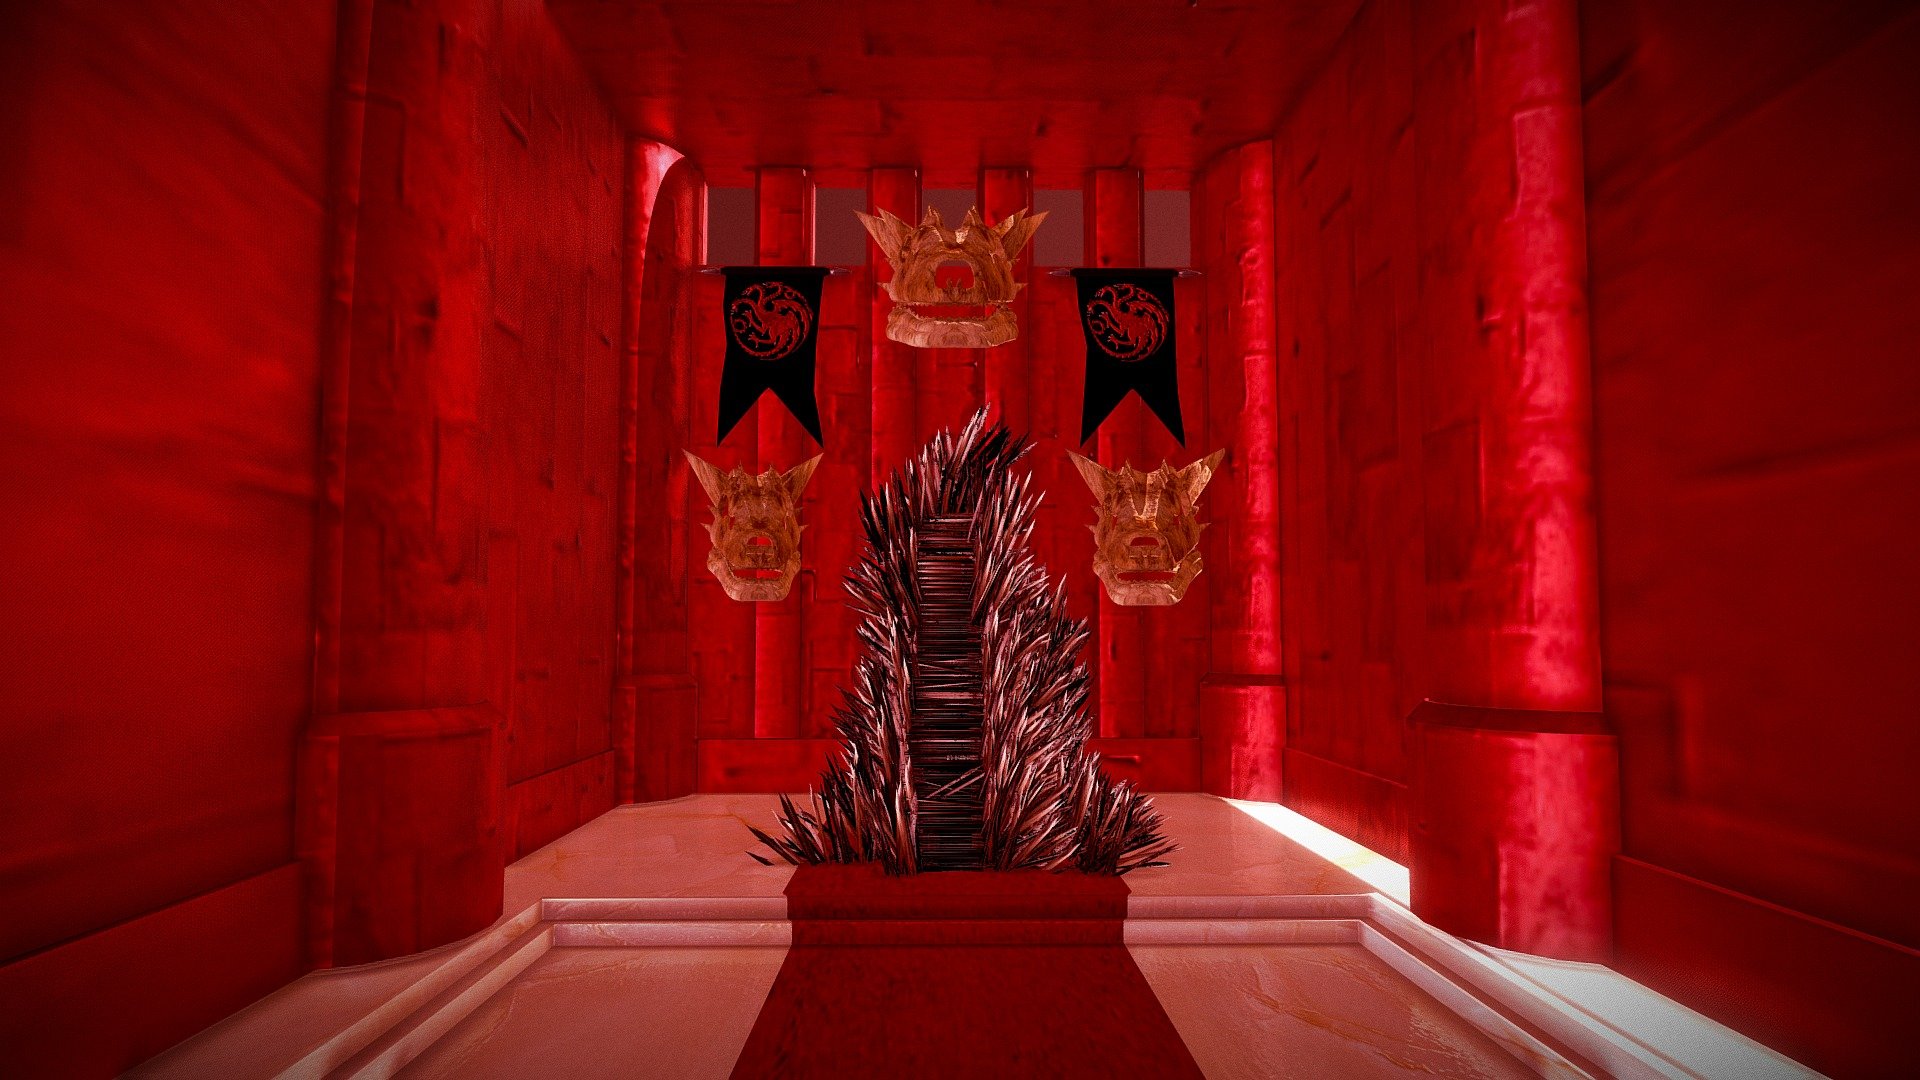 Updated 12/31/2018

The Iron Throne is the throne upon which the King of the Andals and the First Men sits, located in the Great Hall of the Red Keep in the city of King's Landing. Besides the monarchs themselves, only their Hand may sit on the Iron Throne. The Iron Throne is also a metonym referring to the monarchy that rules the Seven Kingdoms and the authority of the monarchy (e.g. &ldquo;rebellion against the Iron Throne